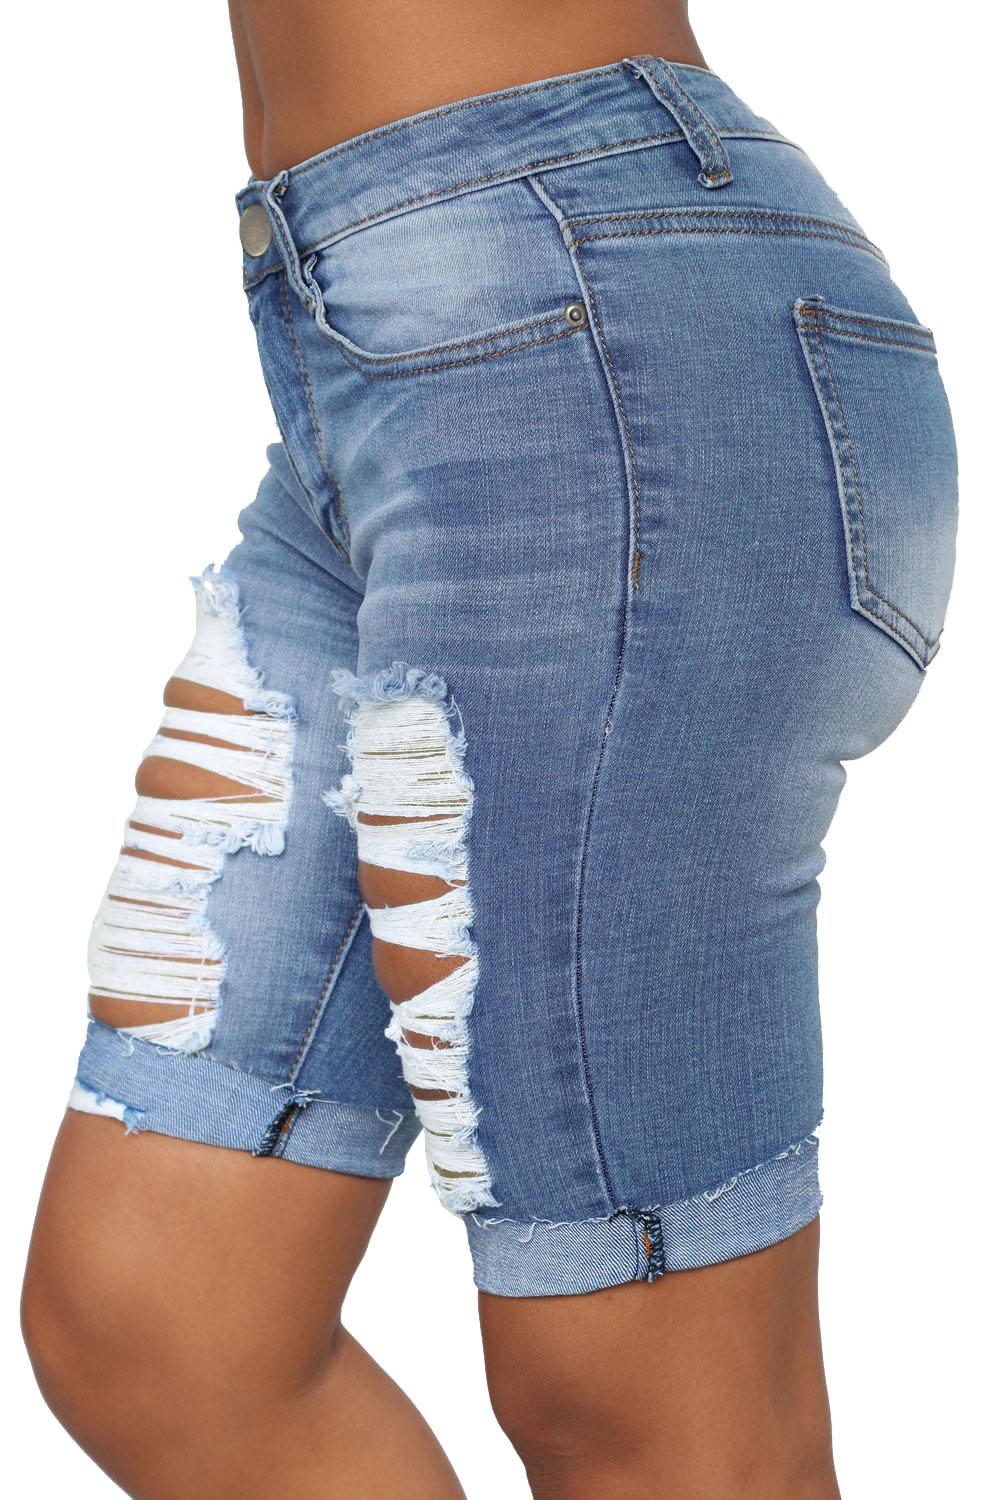 Elegant Turn Up Cuffs Above-knee Length Ribbed Jeans